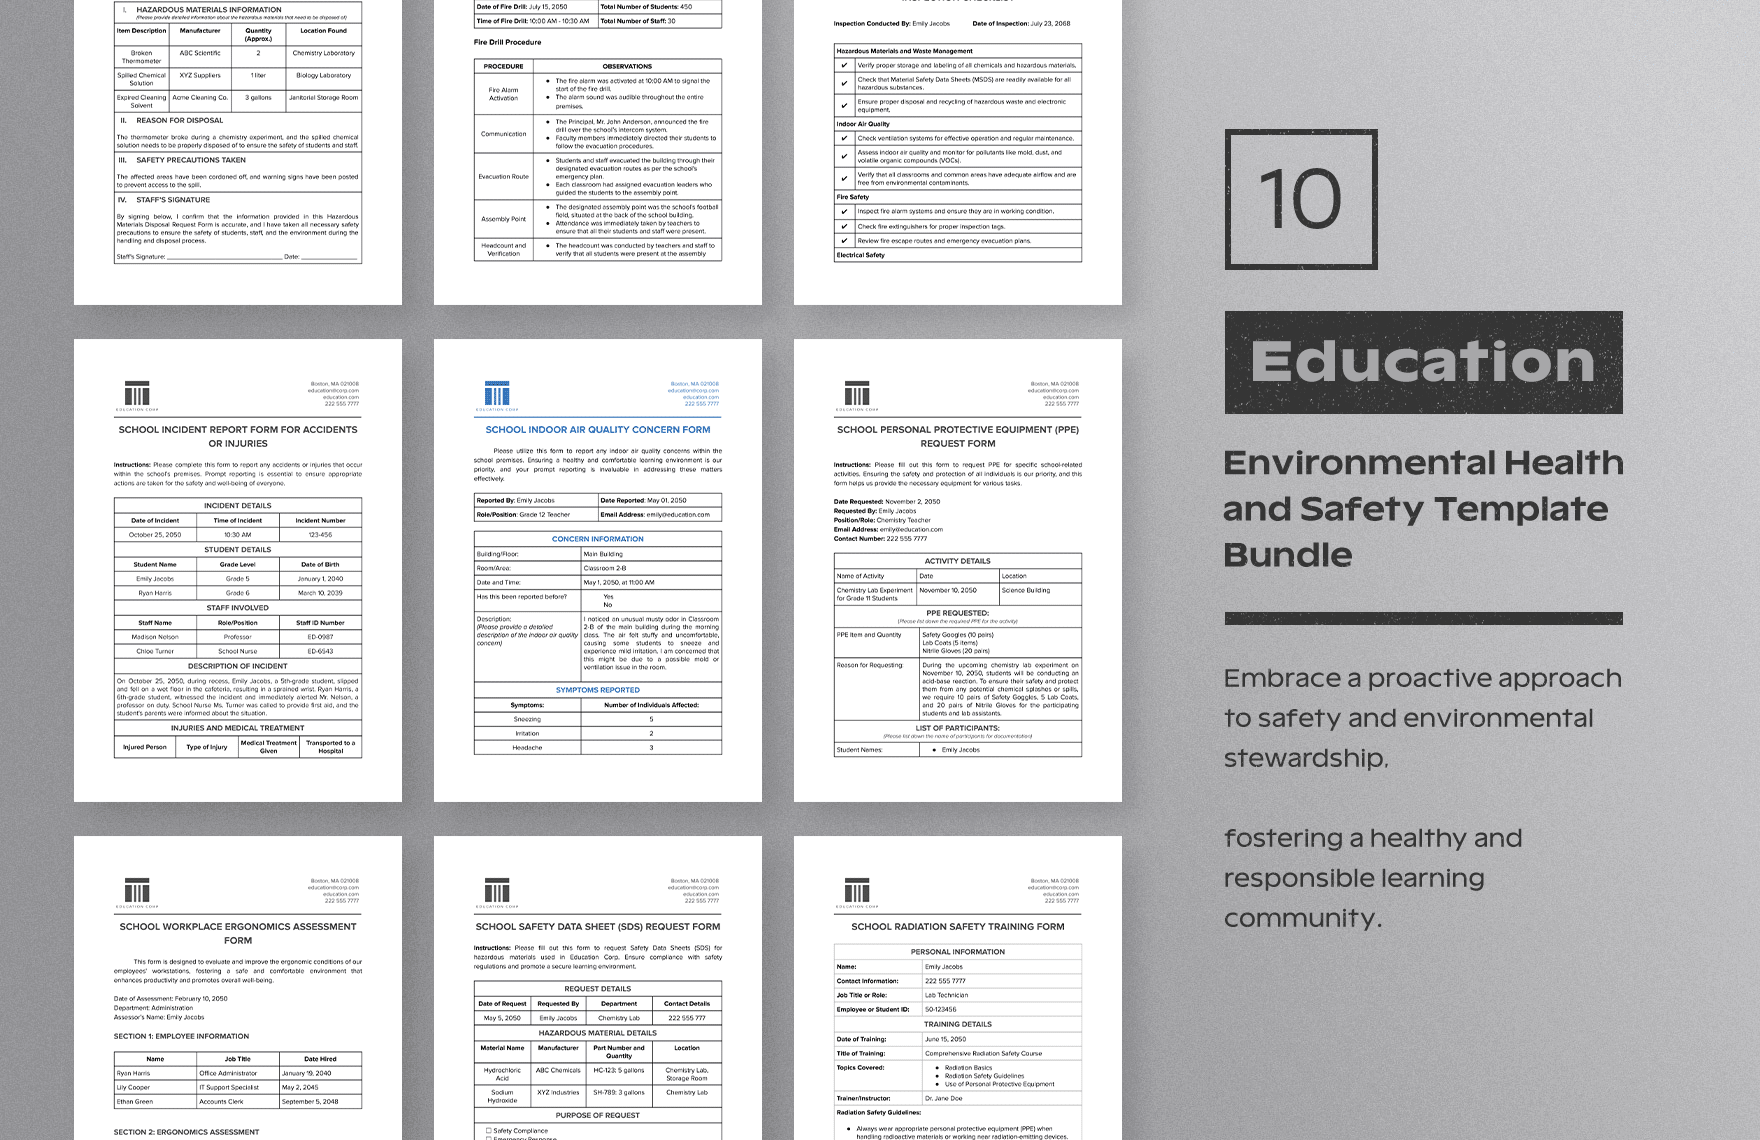 10 Education Environmental Health and Safety Template Bundle